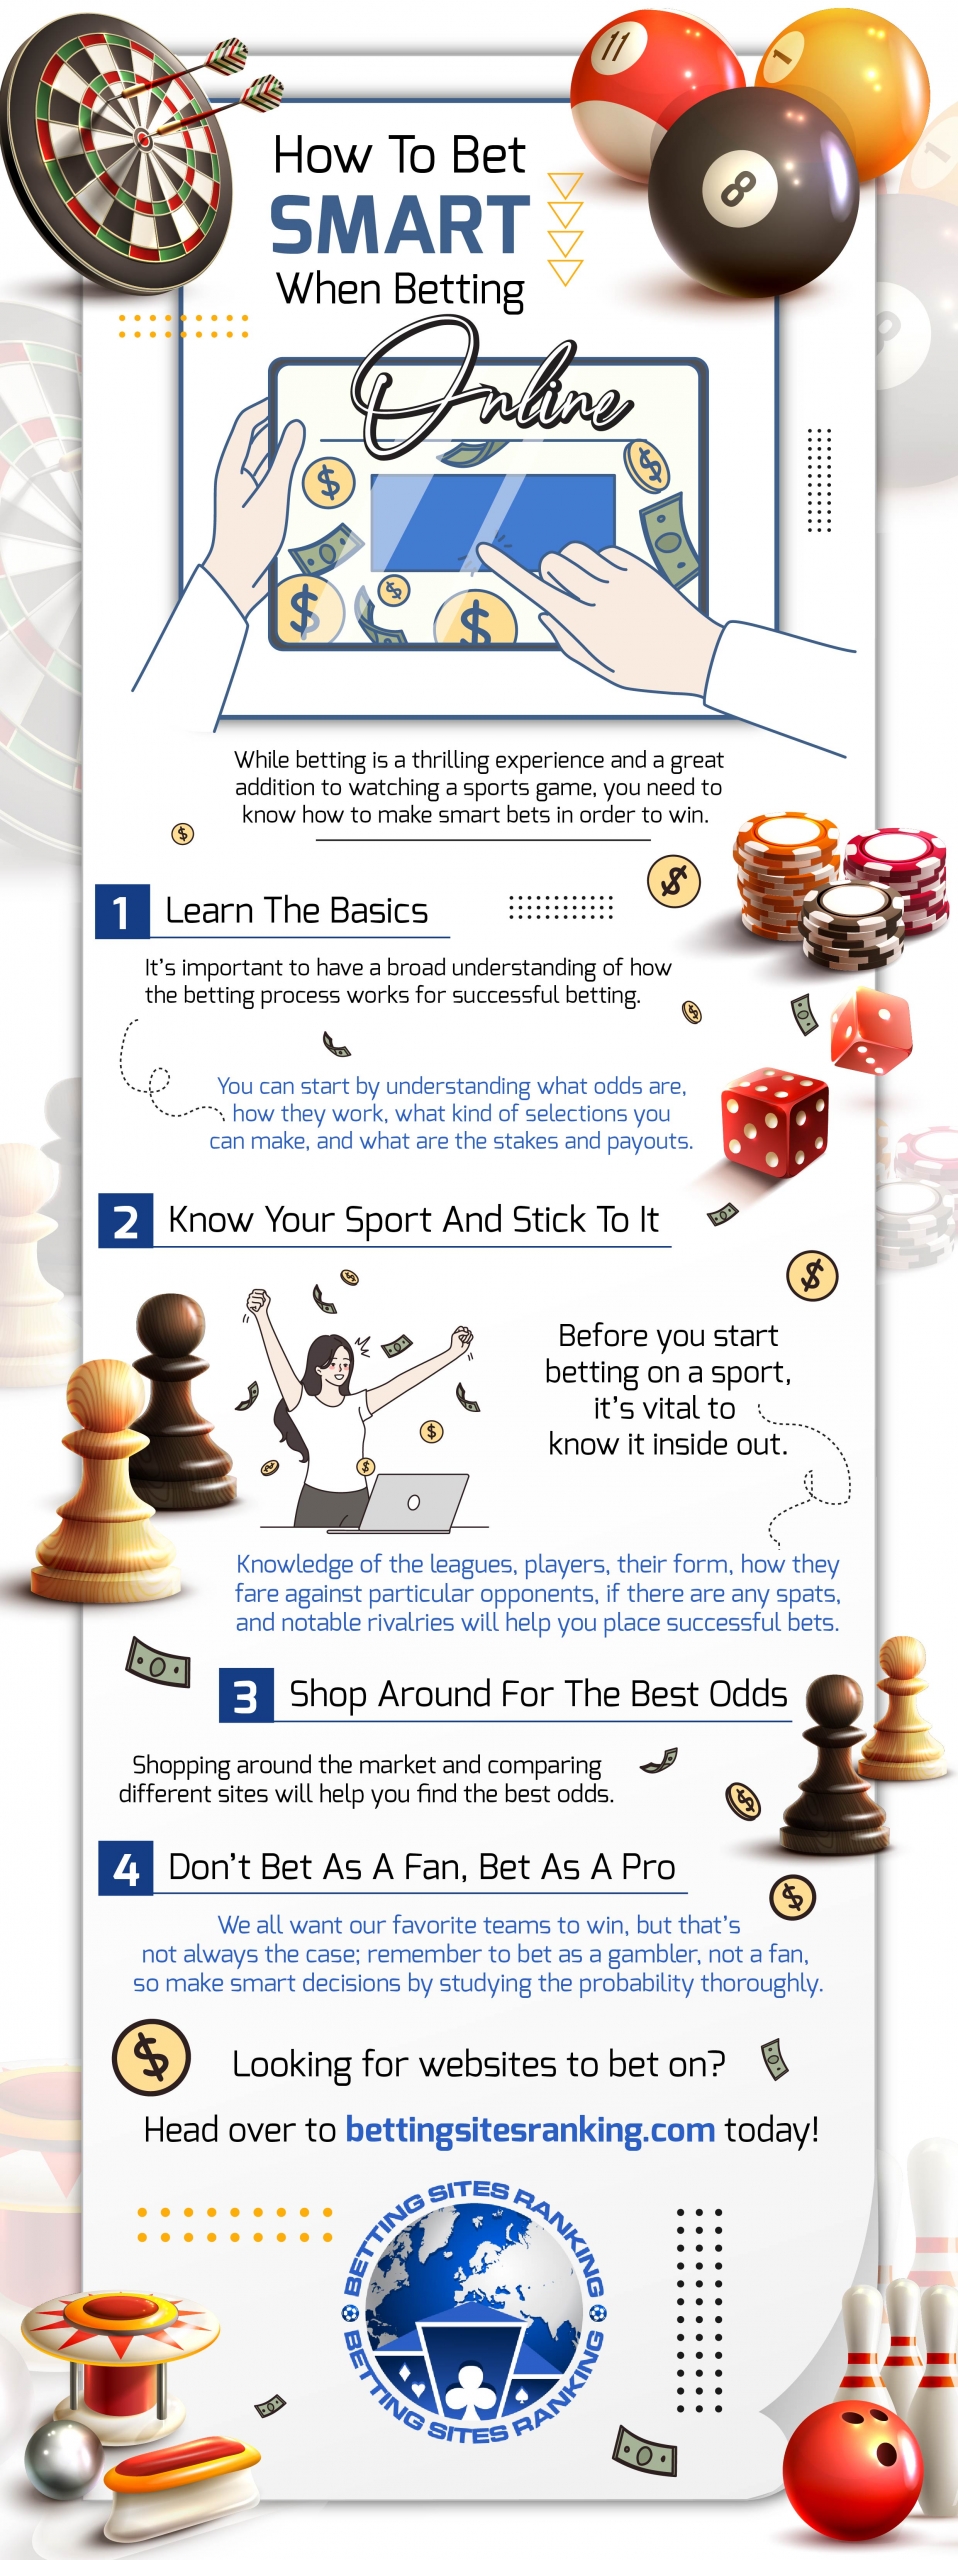 How-To-Bet-Smart-When-Betting-Online